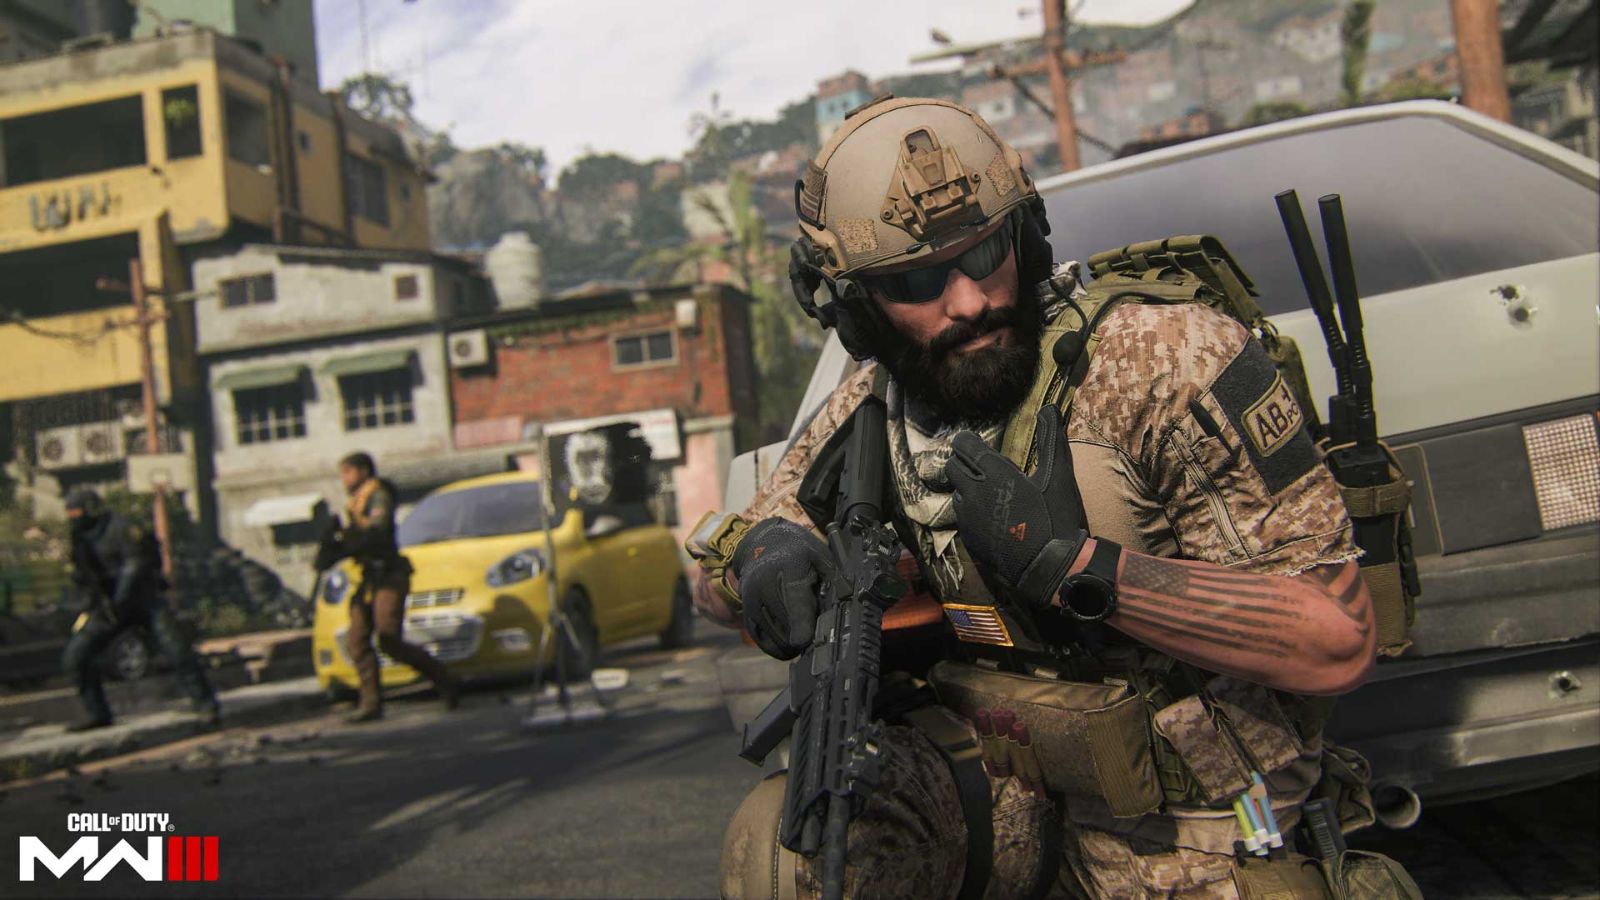 MW3 season 1 release time: When does the new MW3 season launch